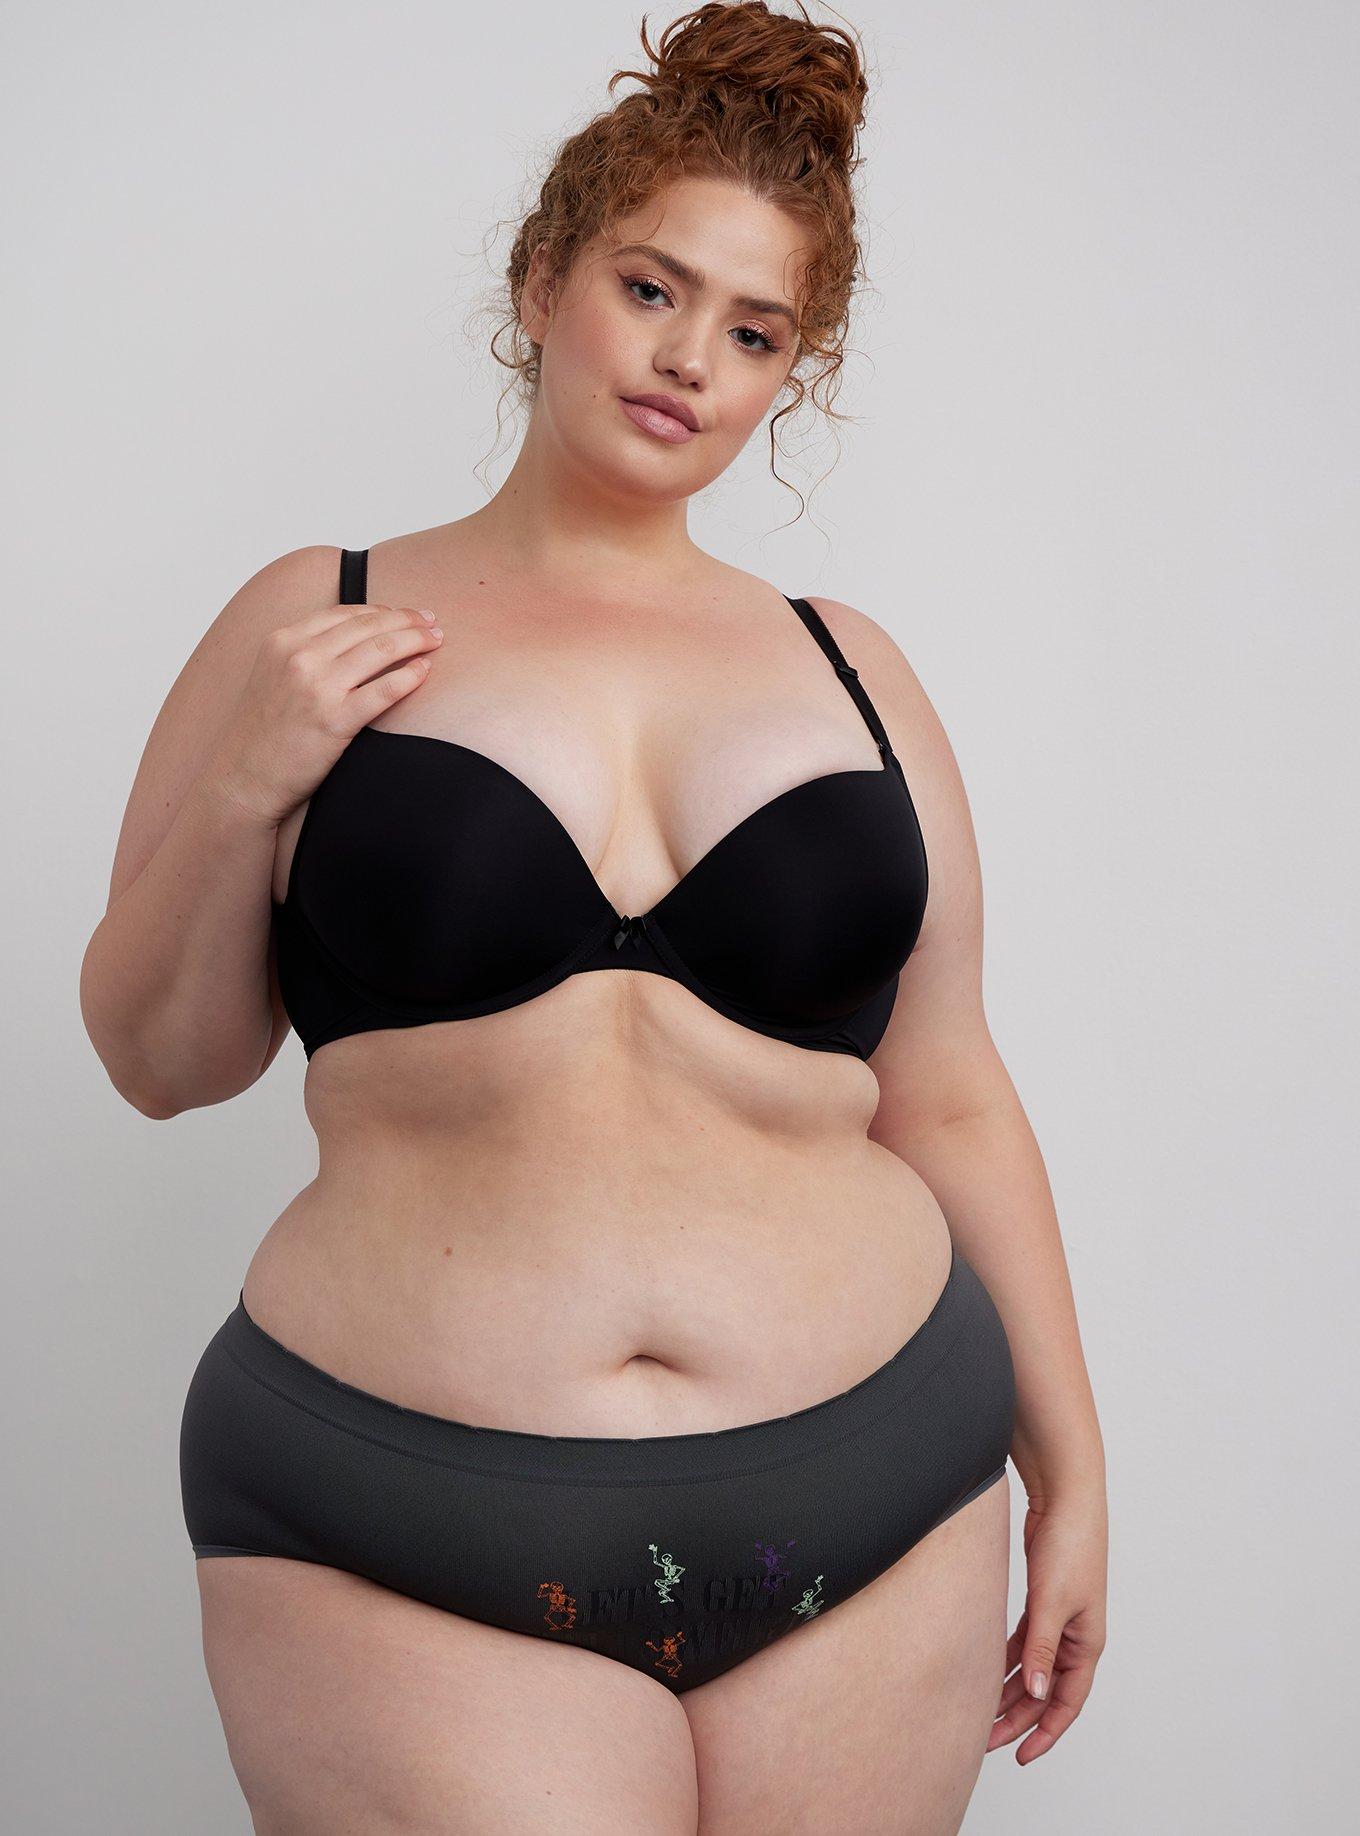 Plus Size - Seamless Foil Mid Rise Cheeky Panty - Torrid